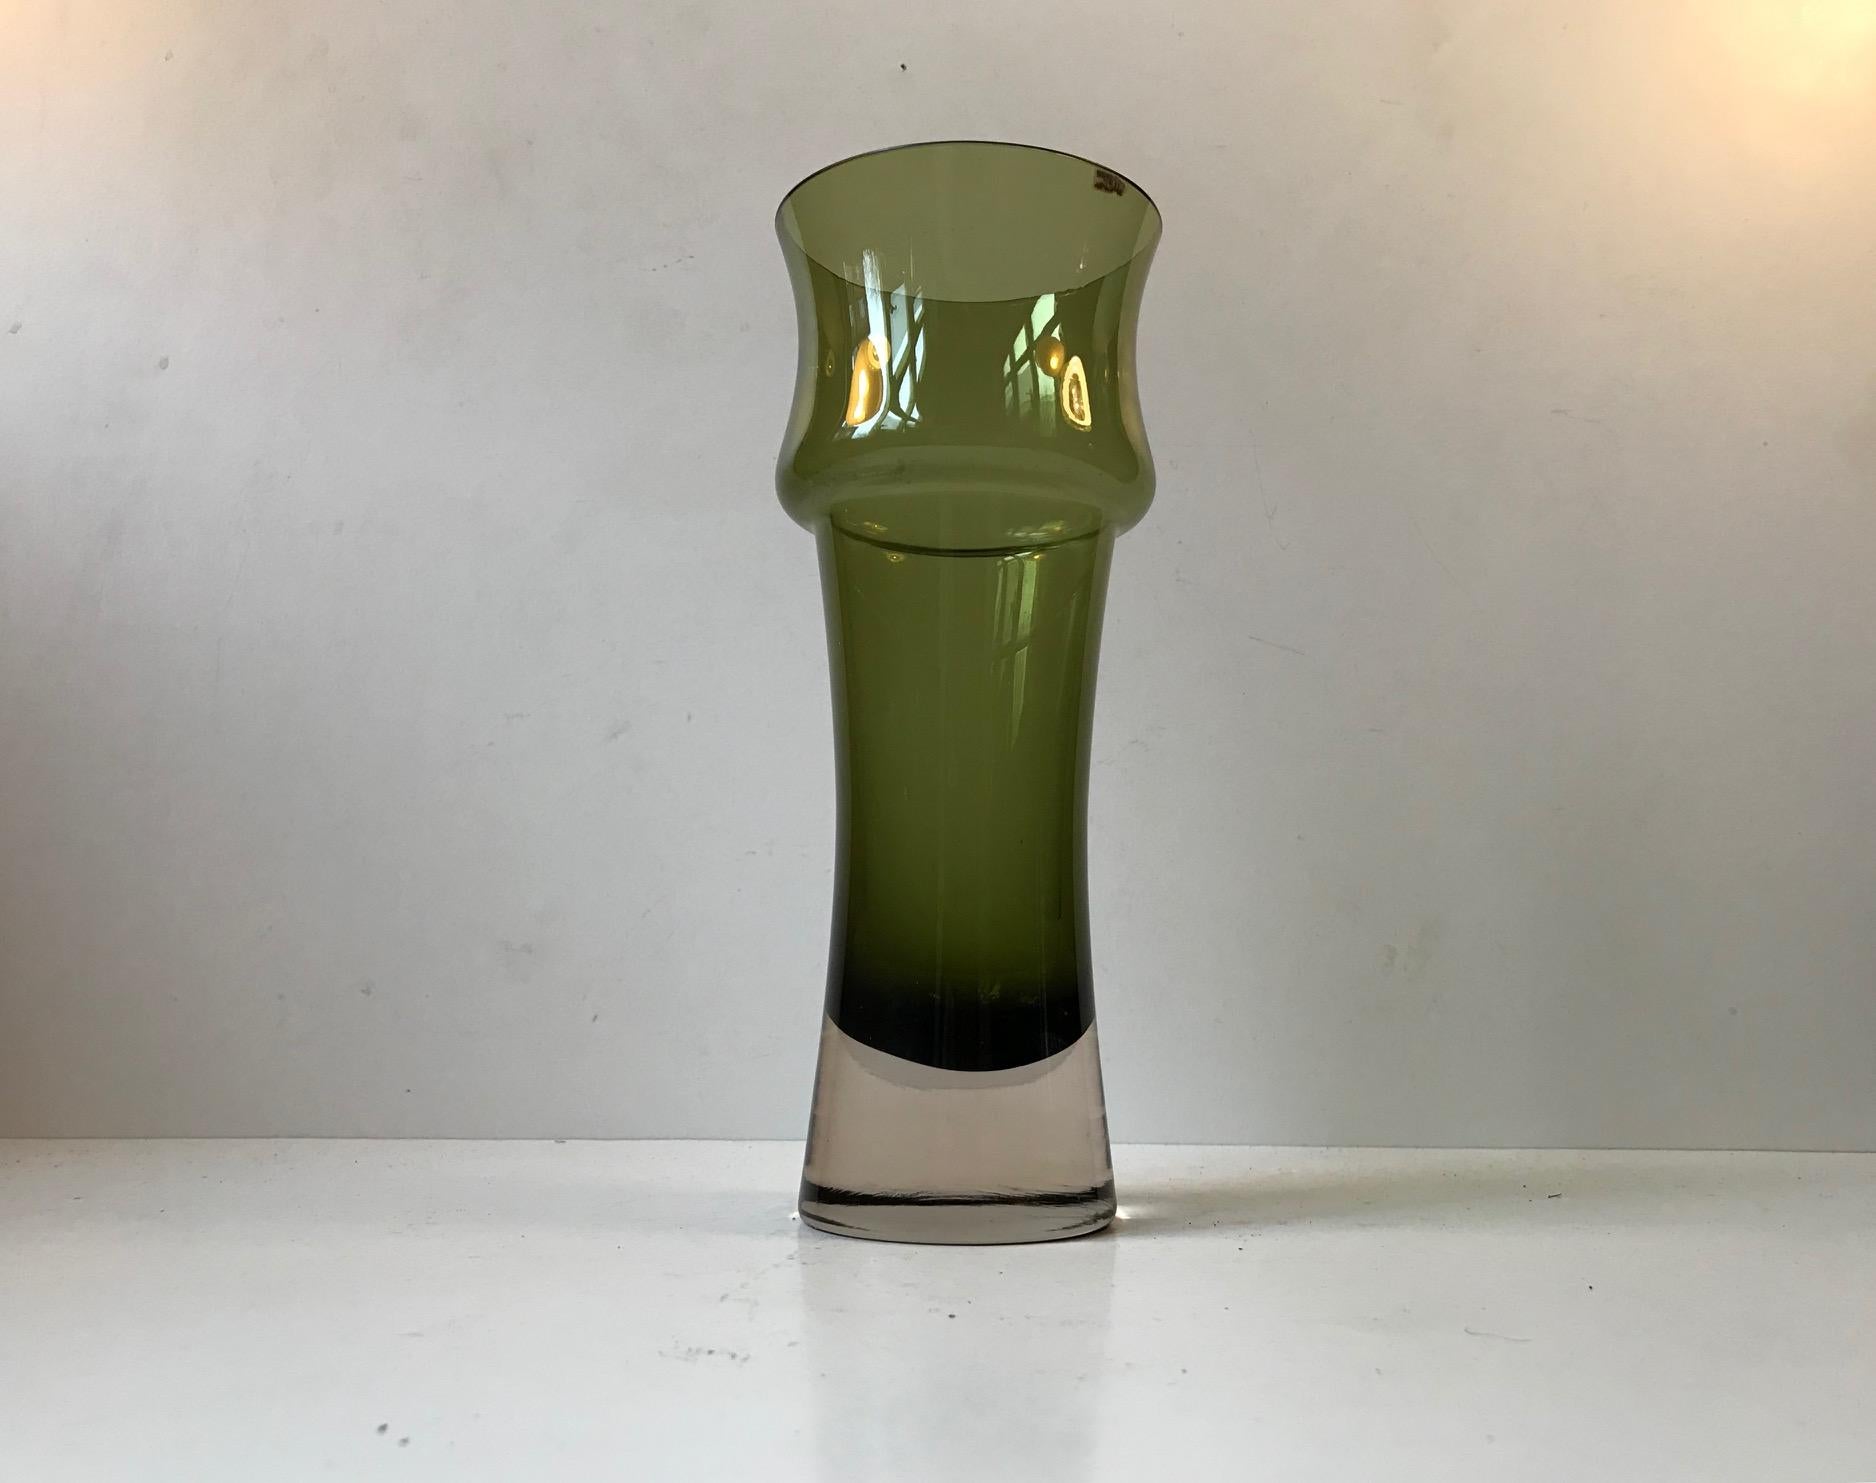 This olive green vase was designed by Tamara Aladin in 1970 and manufactured by Riihimaen Lasi. The vase retains its paper label with the country of origin (Finland).